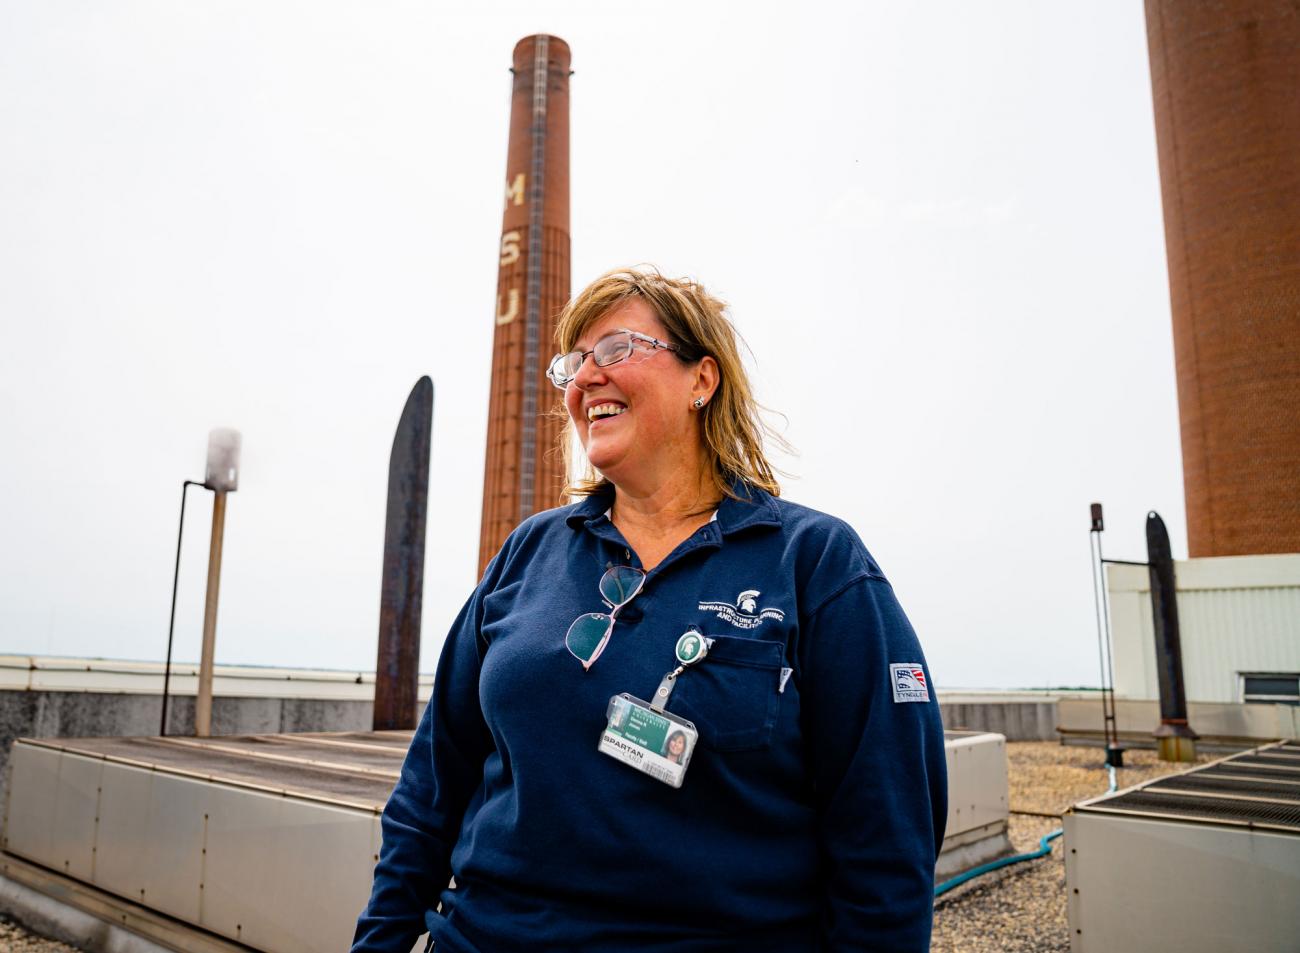 Donna Jones smiling in a blue IPF polo shirt on the roof of the power plant